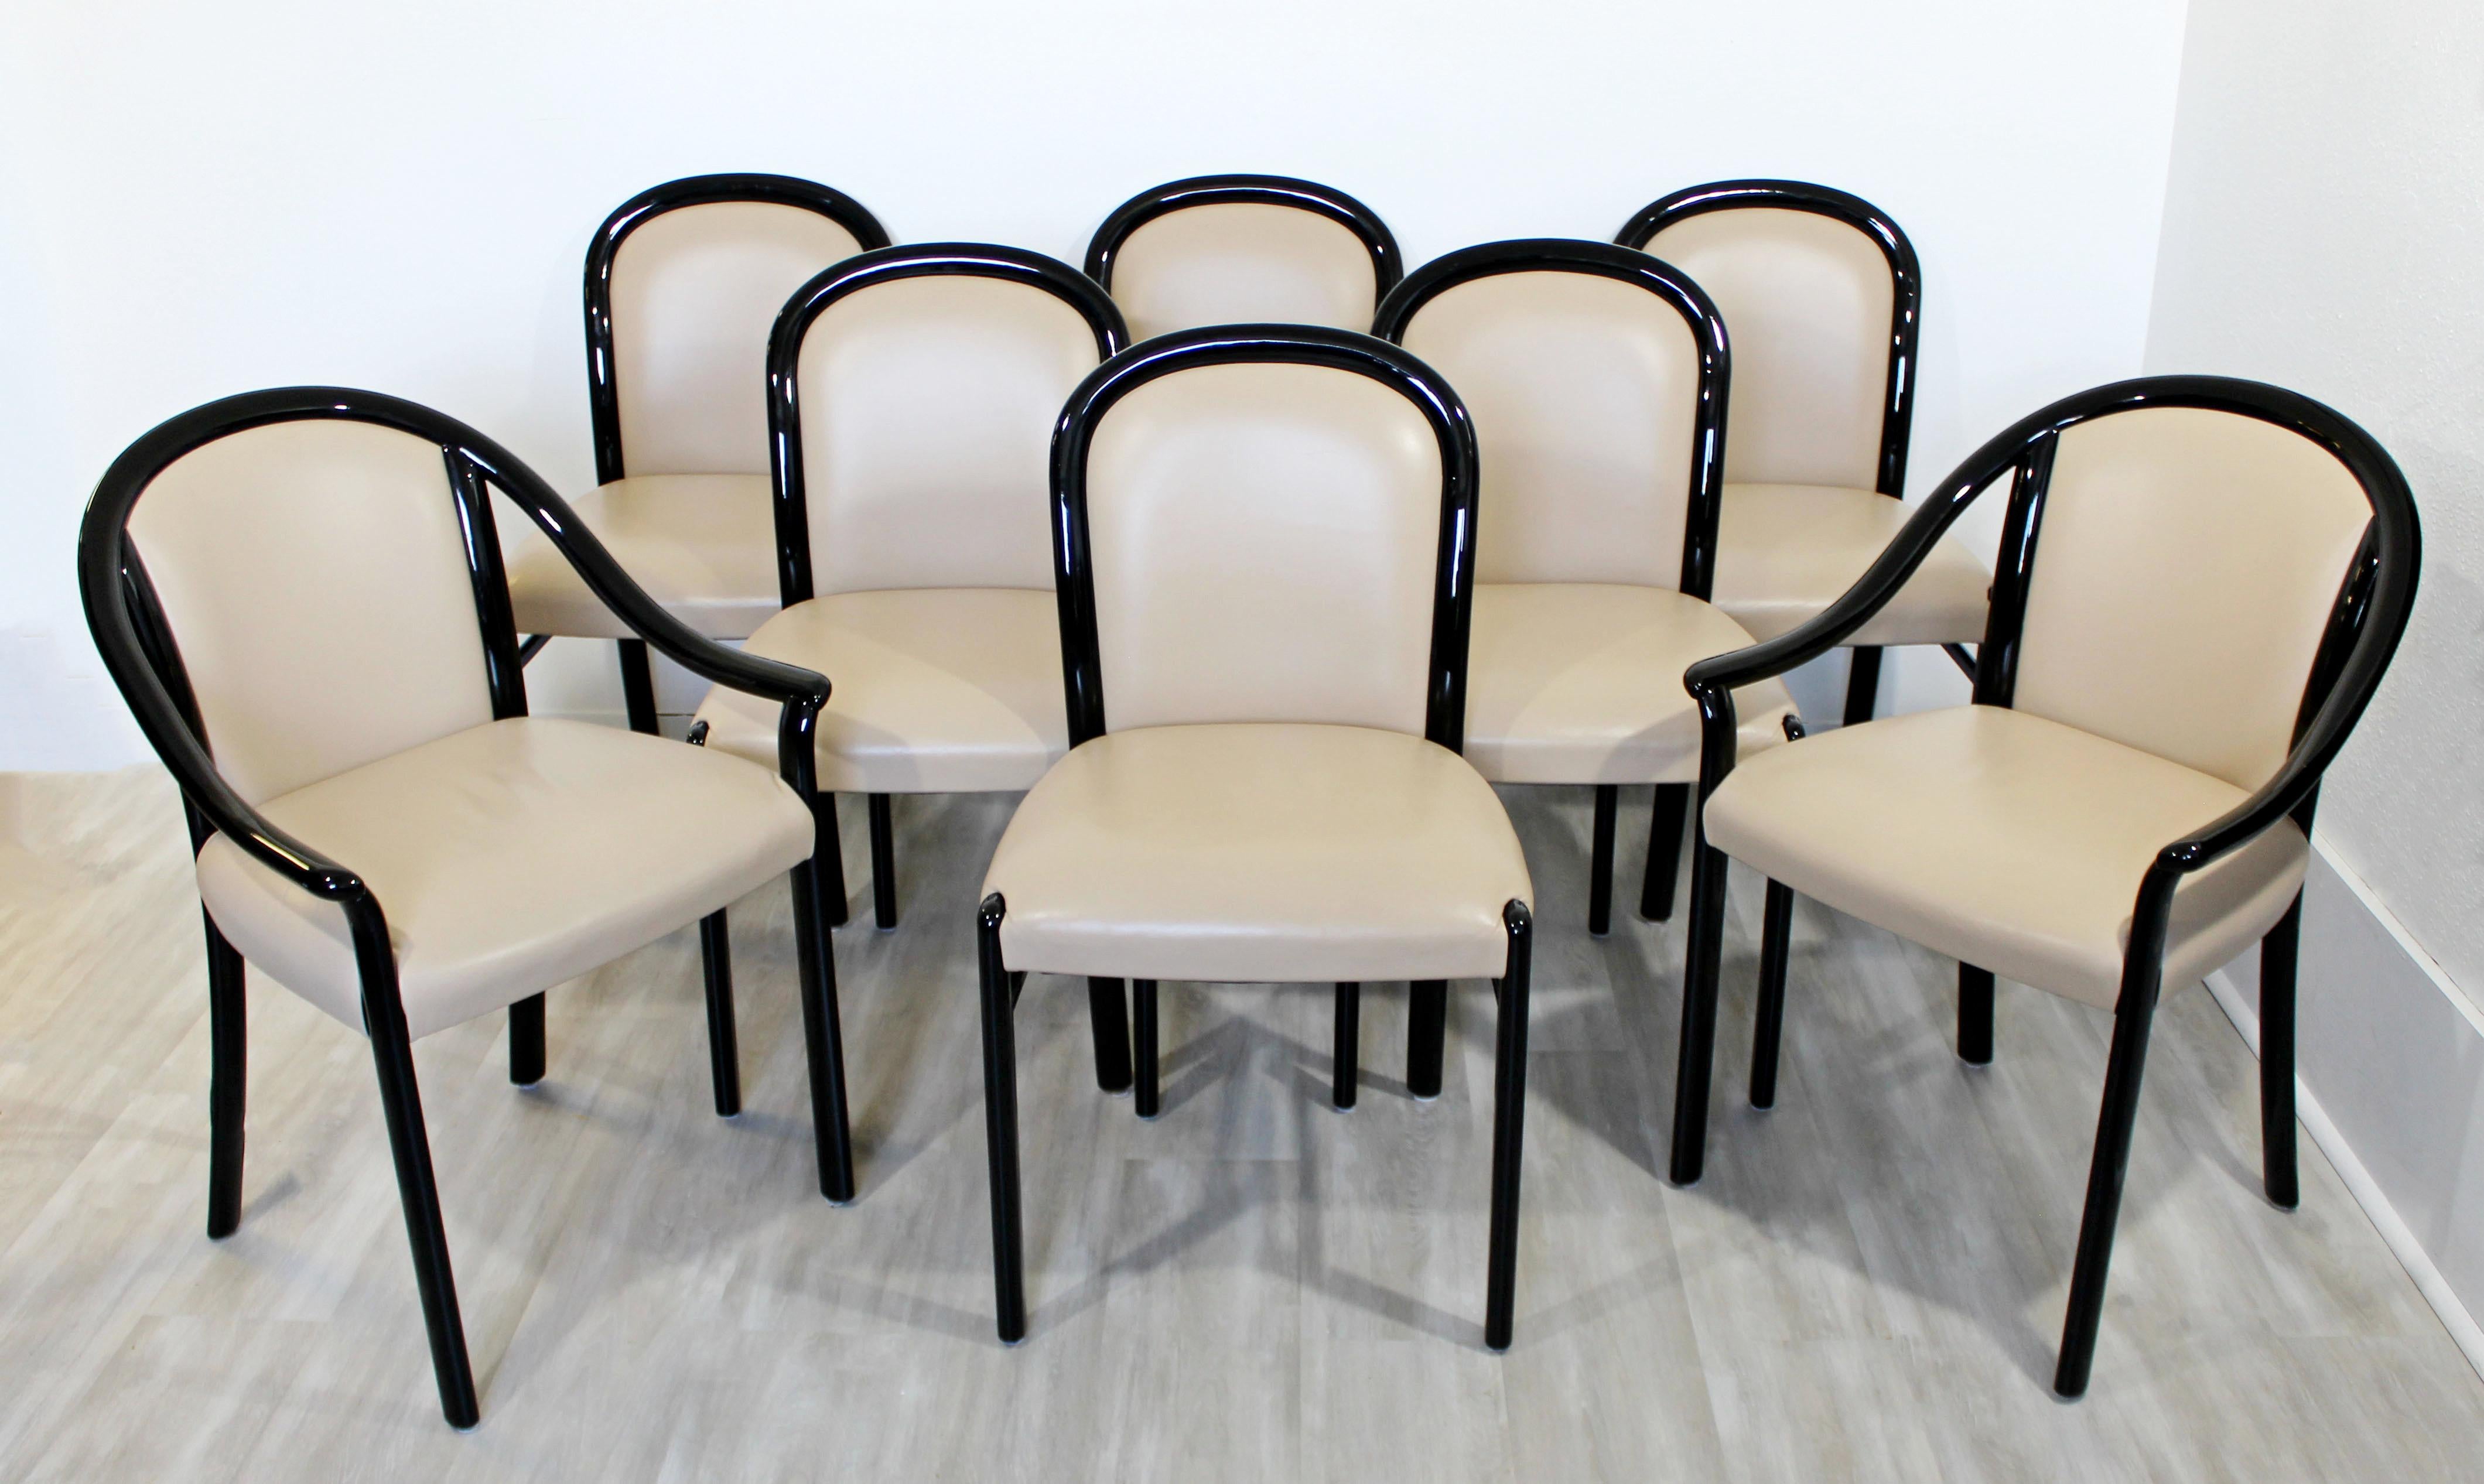 For your consideration is a spectacular set of eight, beige leather and black lacquer wood, curved dining chairs, including six side and two armchairs, circa 1980s. In excellent condition. The dimensions of the armchairs are 23